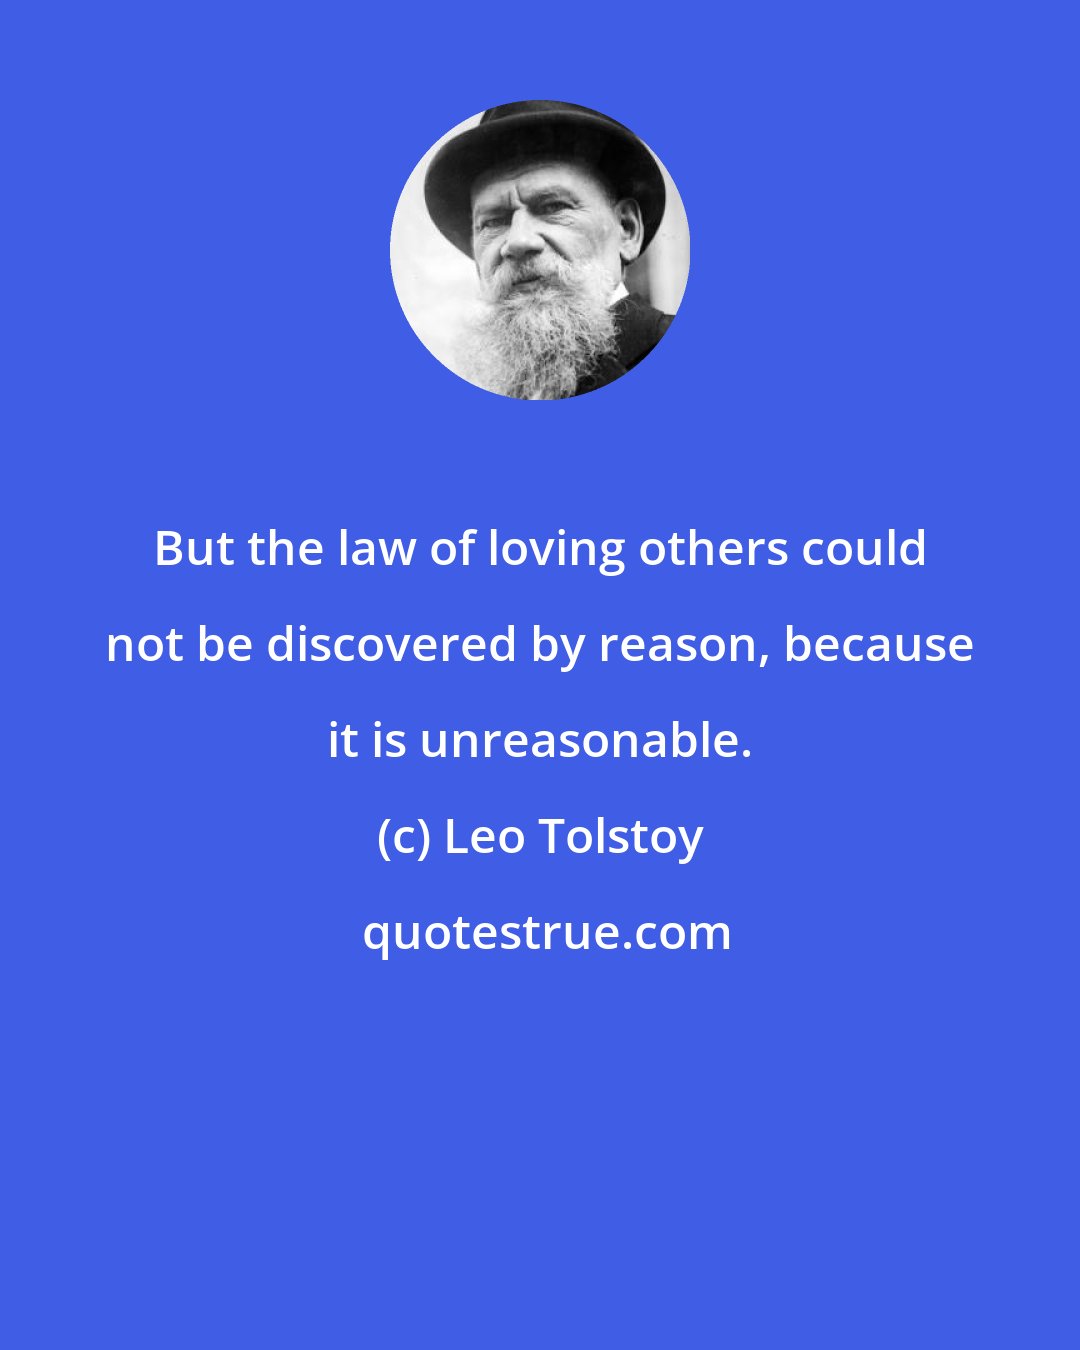 Leo Tolstoy: But the law of loving others could not be discovered by reason, because it is unreasonable.